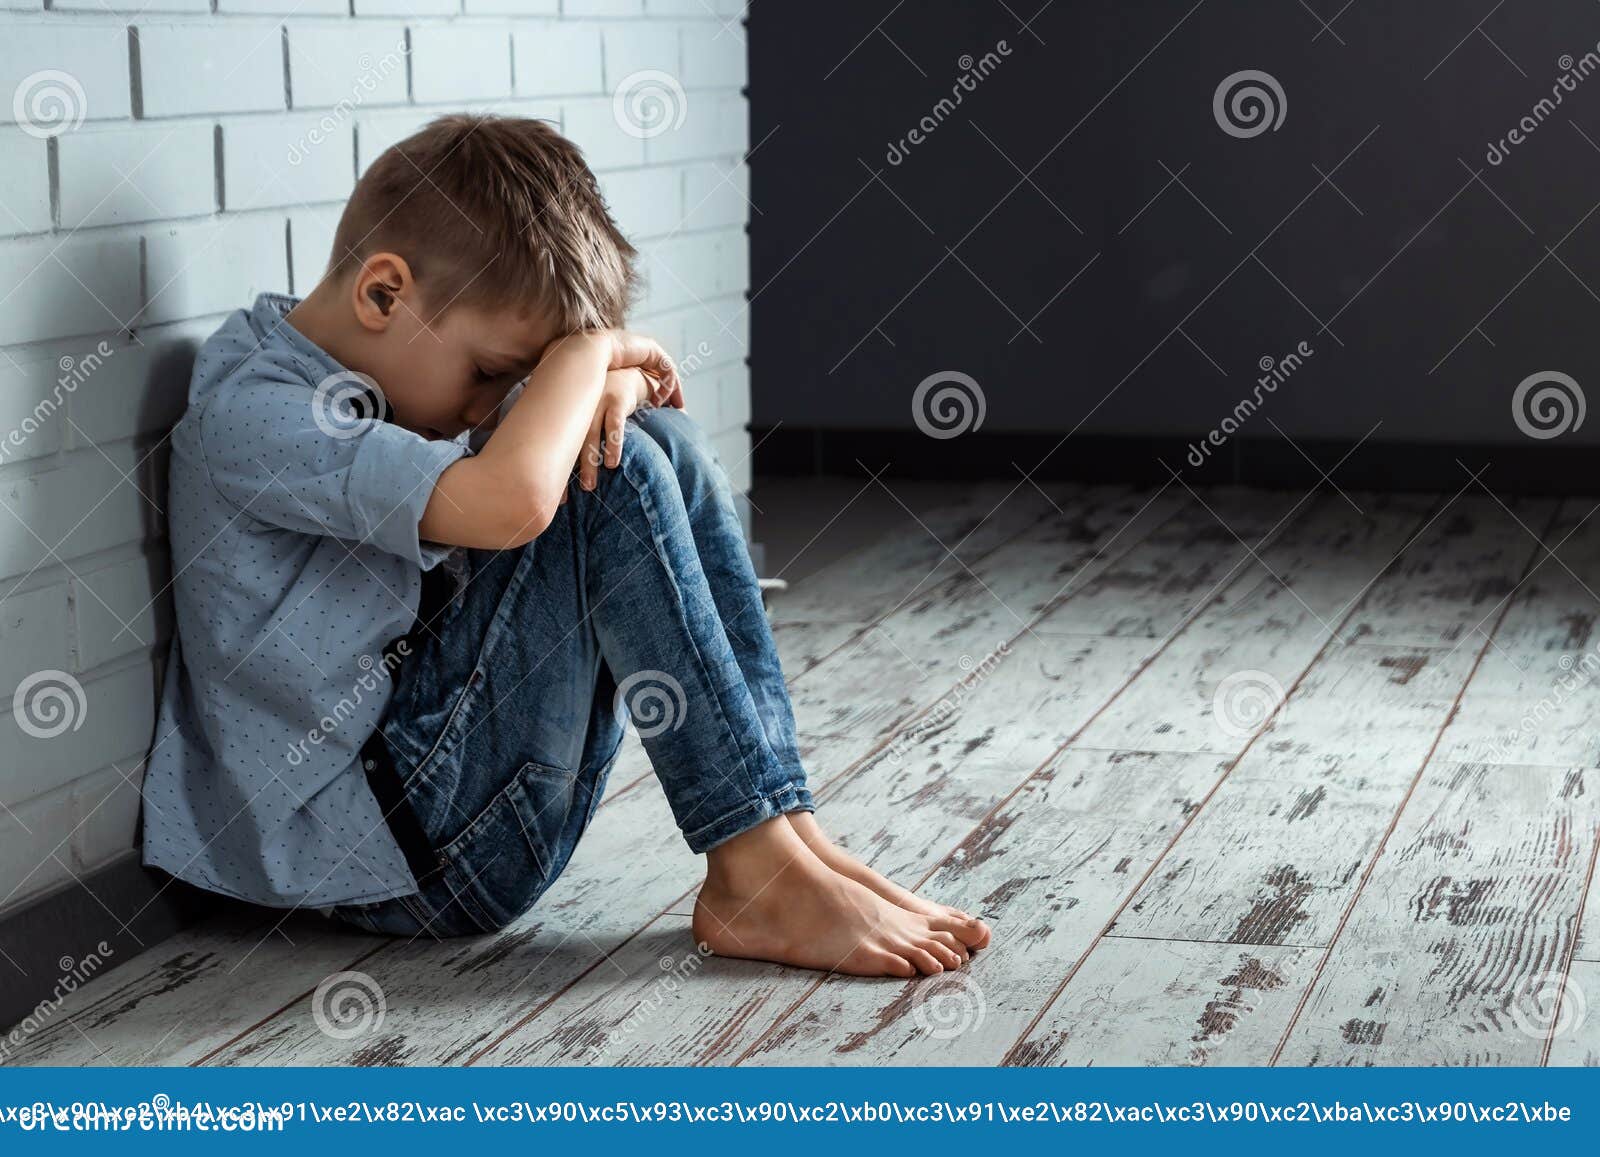 A Young Boy Sits Alone with a Sad Feeling at School Near the Wall ...